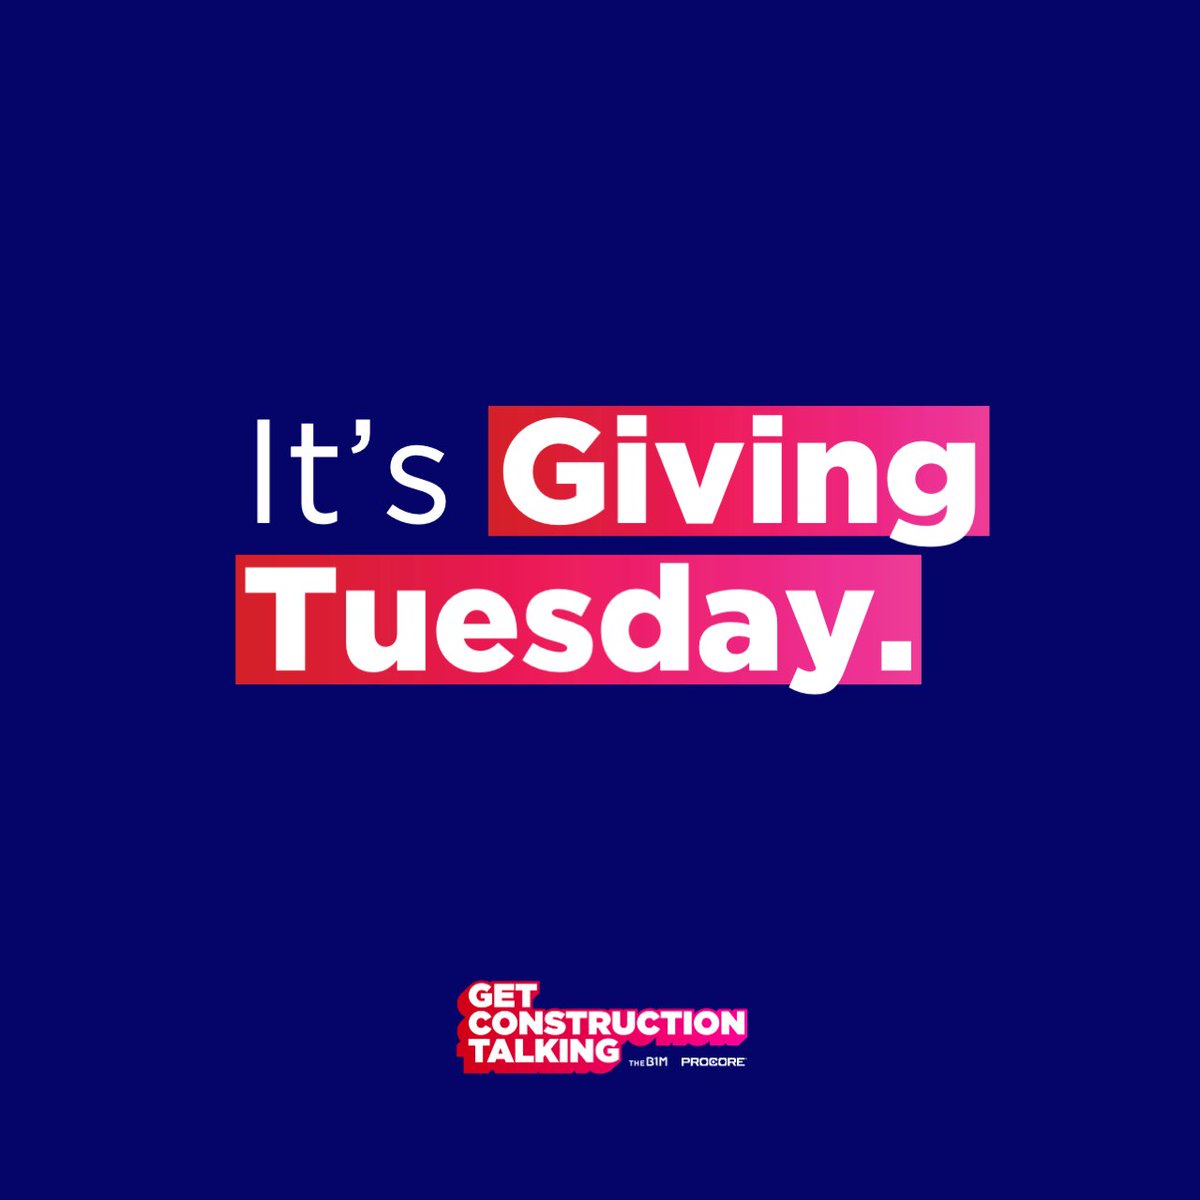 It's Giving Tuesday. Let's support #construction workers, help improve mental health across the sector, and give back to the industry that shapes our world 🌎 Donate here 👉 getconstructiontalking.org/donate #GetConstructionTalking #mentalhealth #GivingTuesday